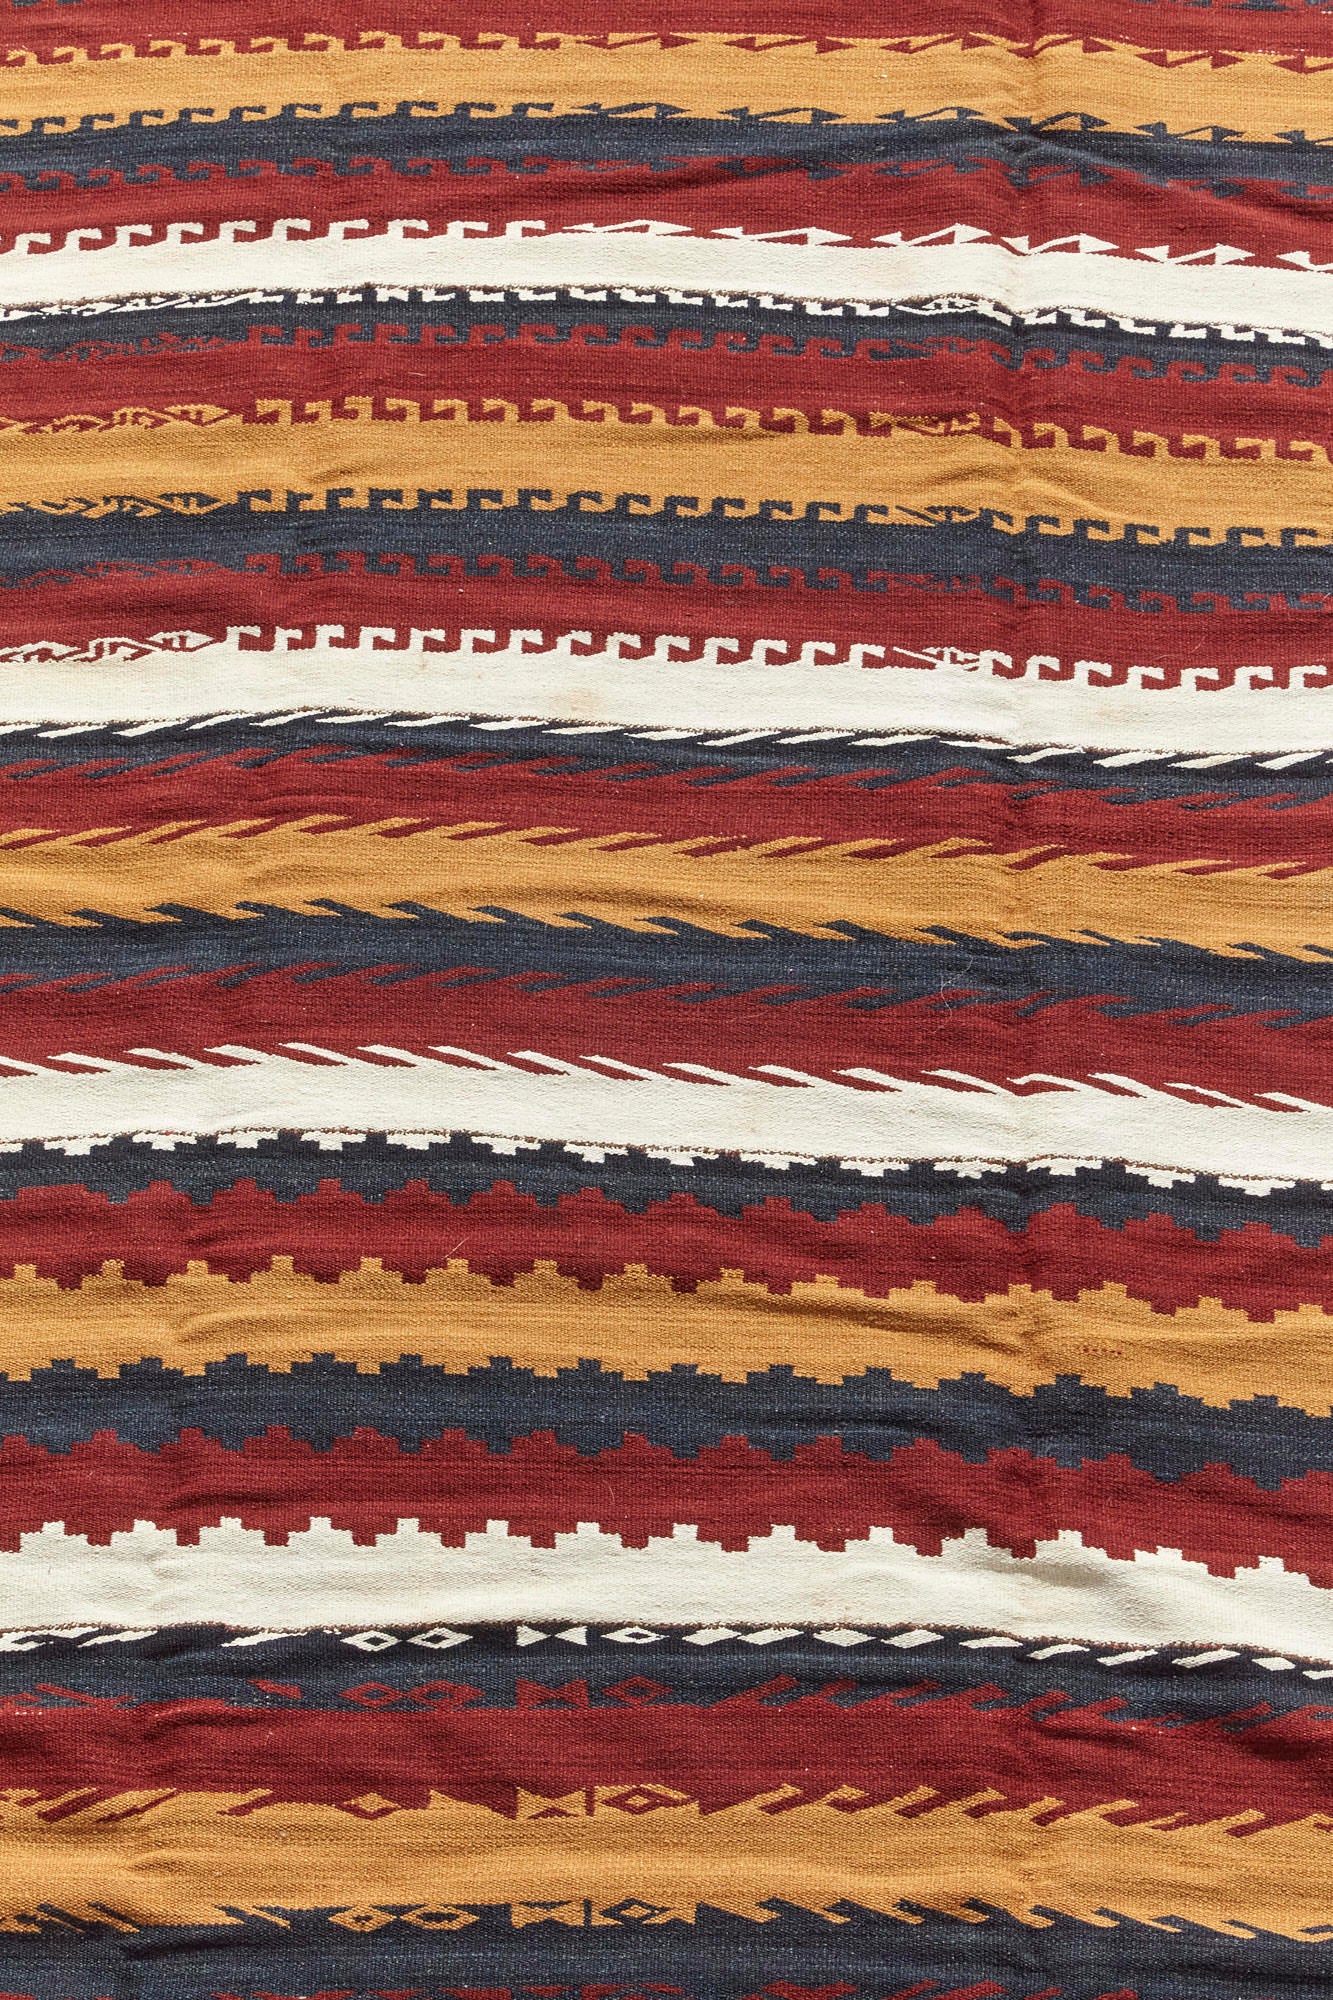 Antique Kilim Turkish rug with red, grey, gold and cream stripes. Hand woven piece, perfect for a living room, bedroom or kitchen - Available from King Kennedy Rugs Los Angeles